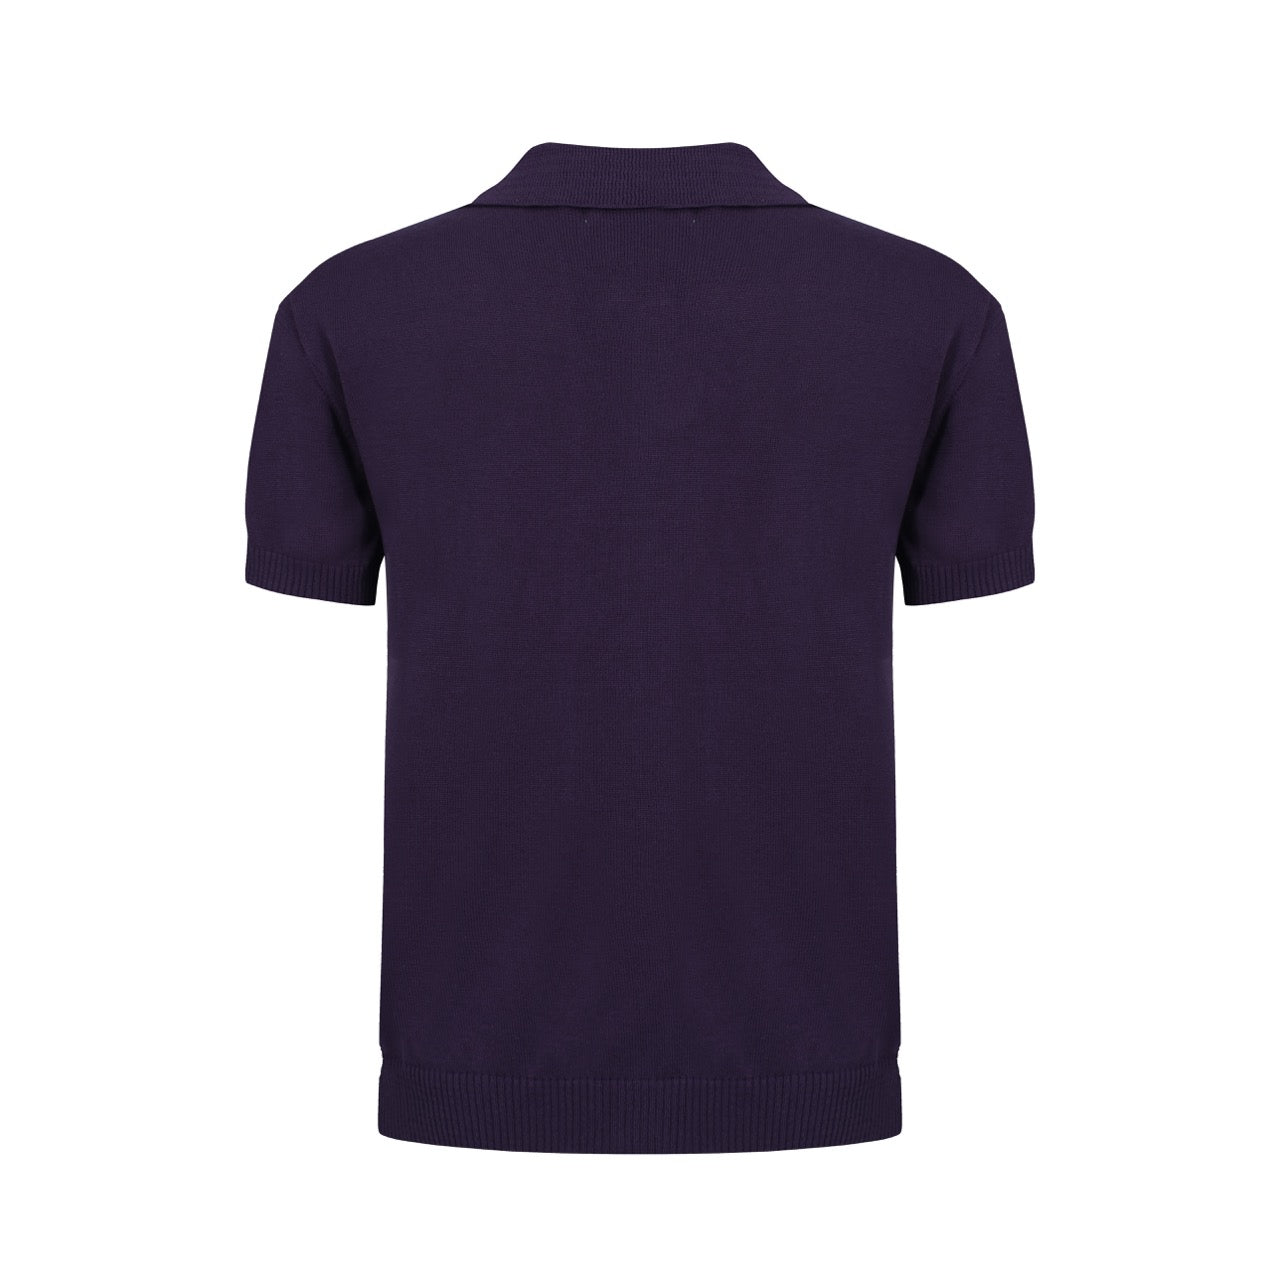 OXKNIT Men Vintage Clothing 1960s Mod Style Casual Violet Classic Button Knit Retro Polo